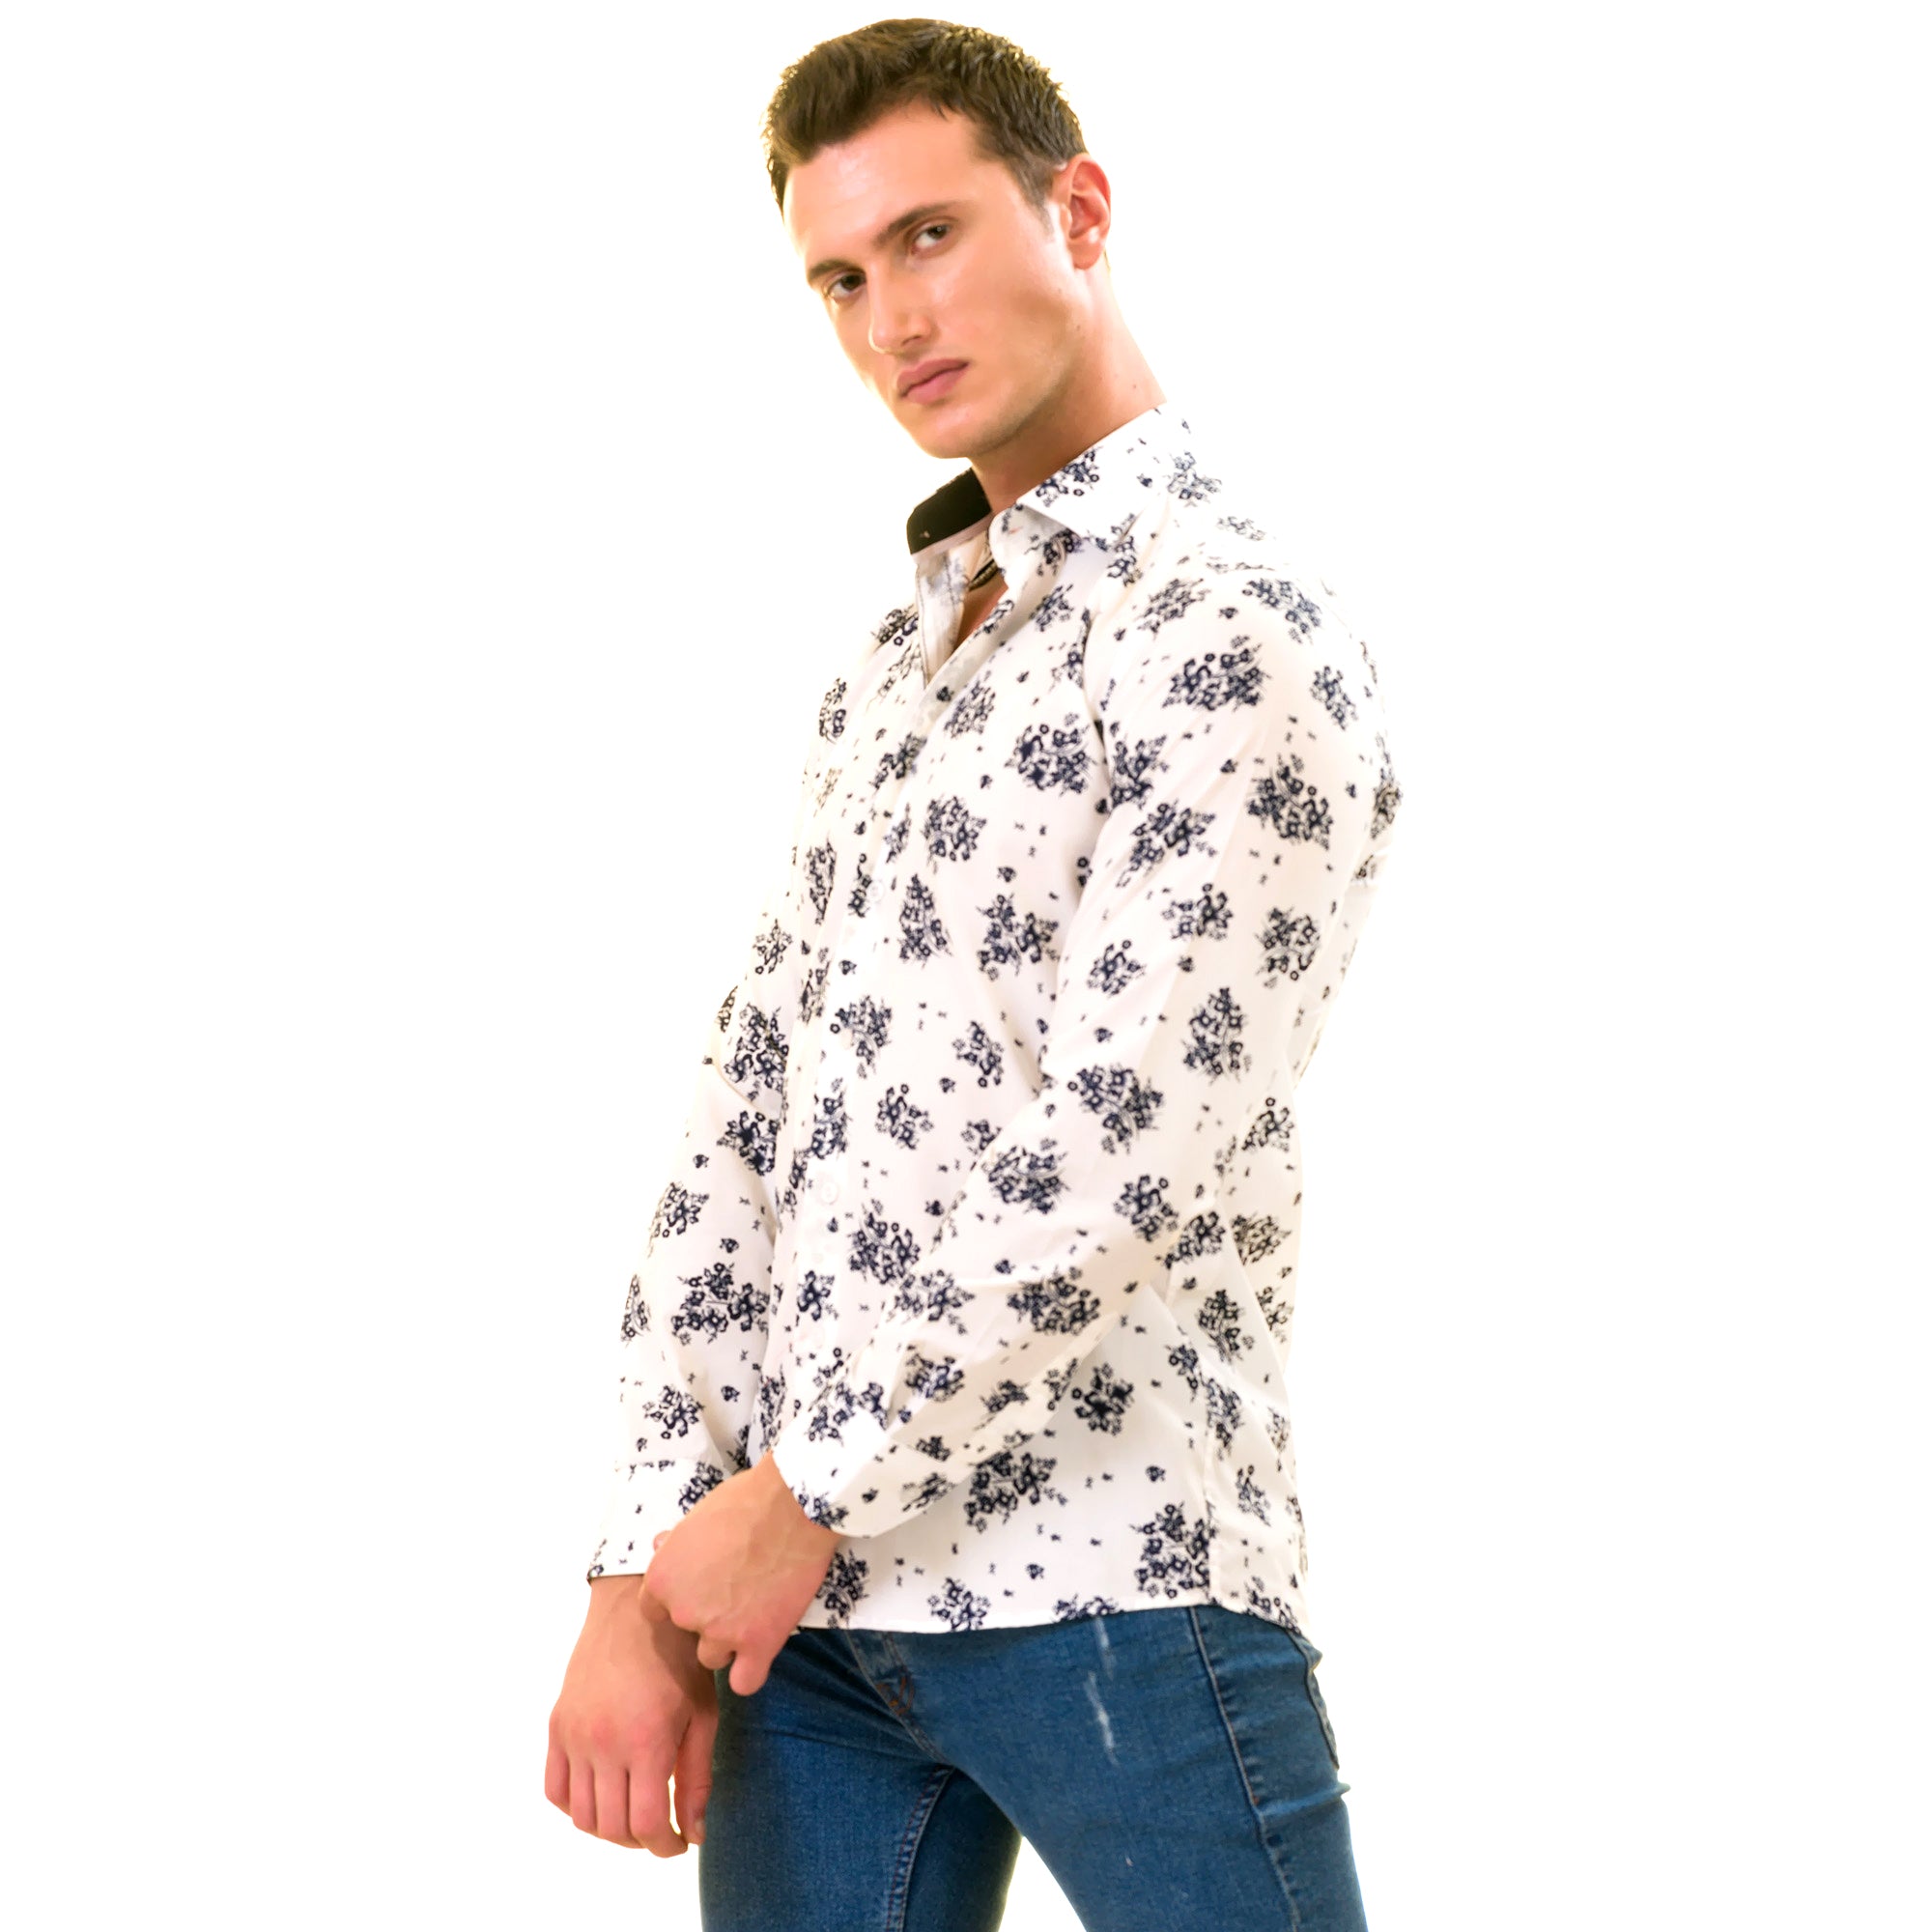 White Navy Floral Digital Men's  Slim Fit Designer Dress Shirt - Tailored Cotton Shirts for Work and Casual Wear